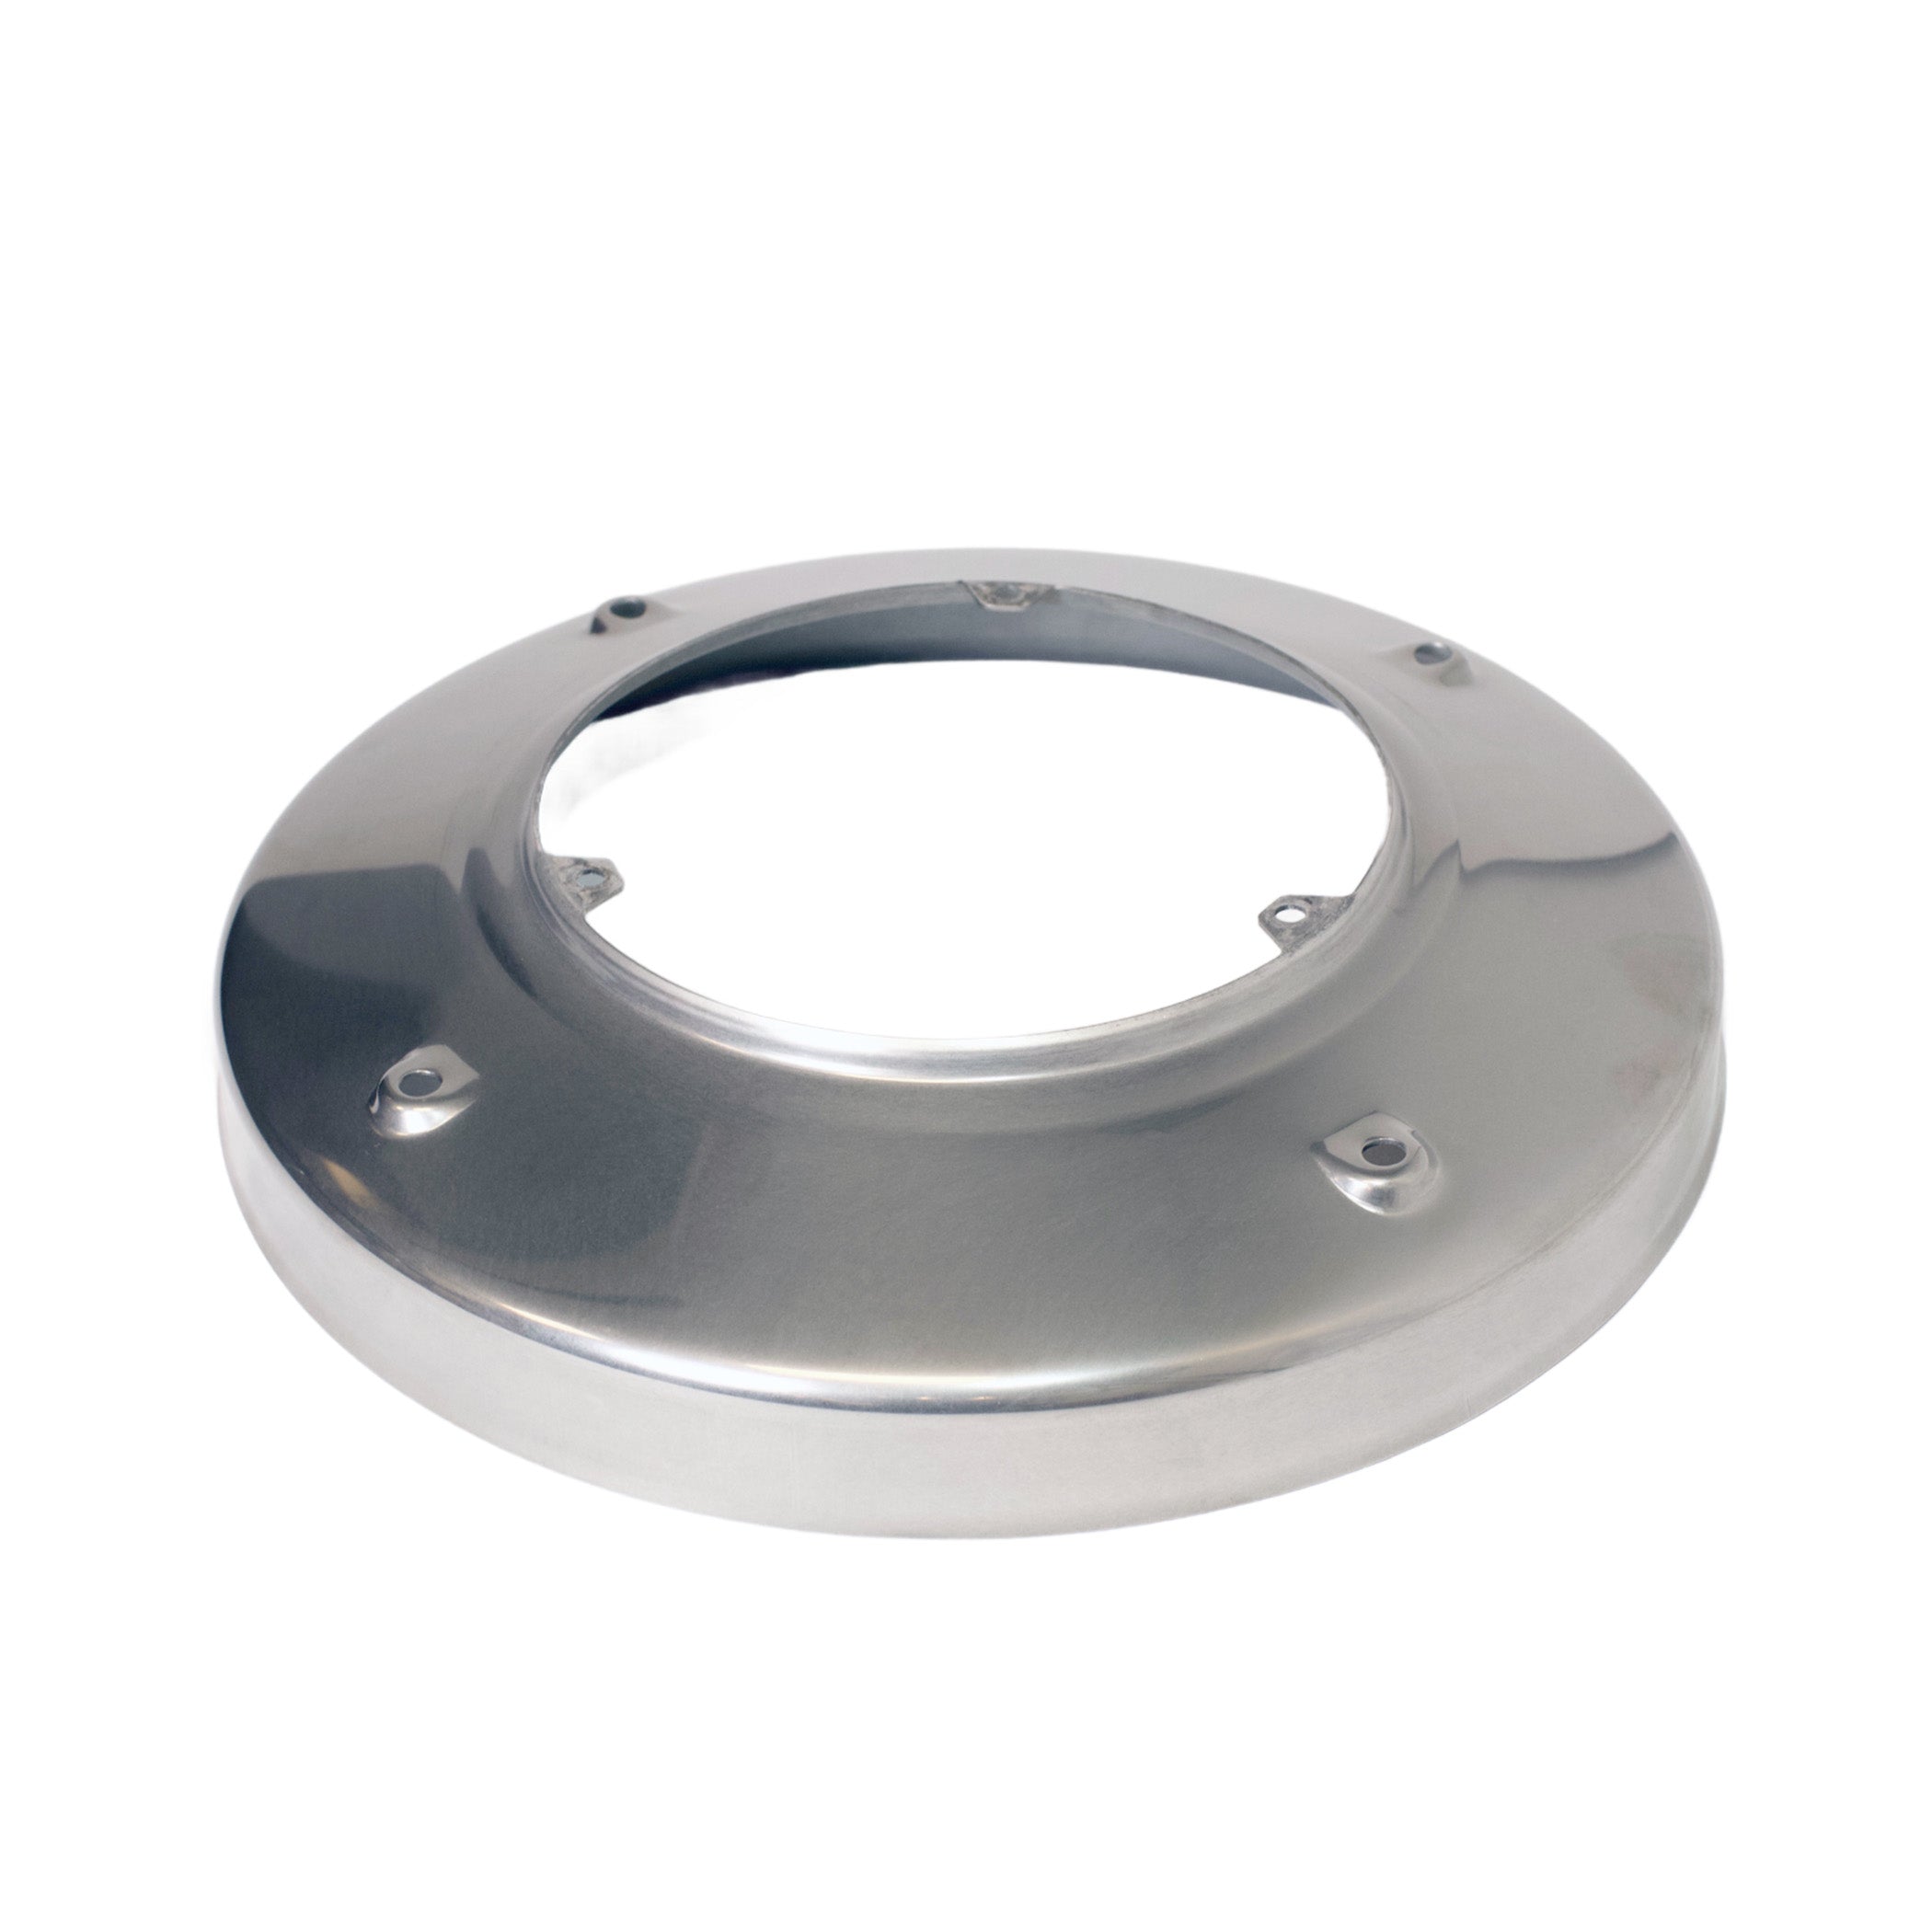 P428310 - Stainless Scuff Base